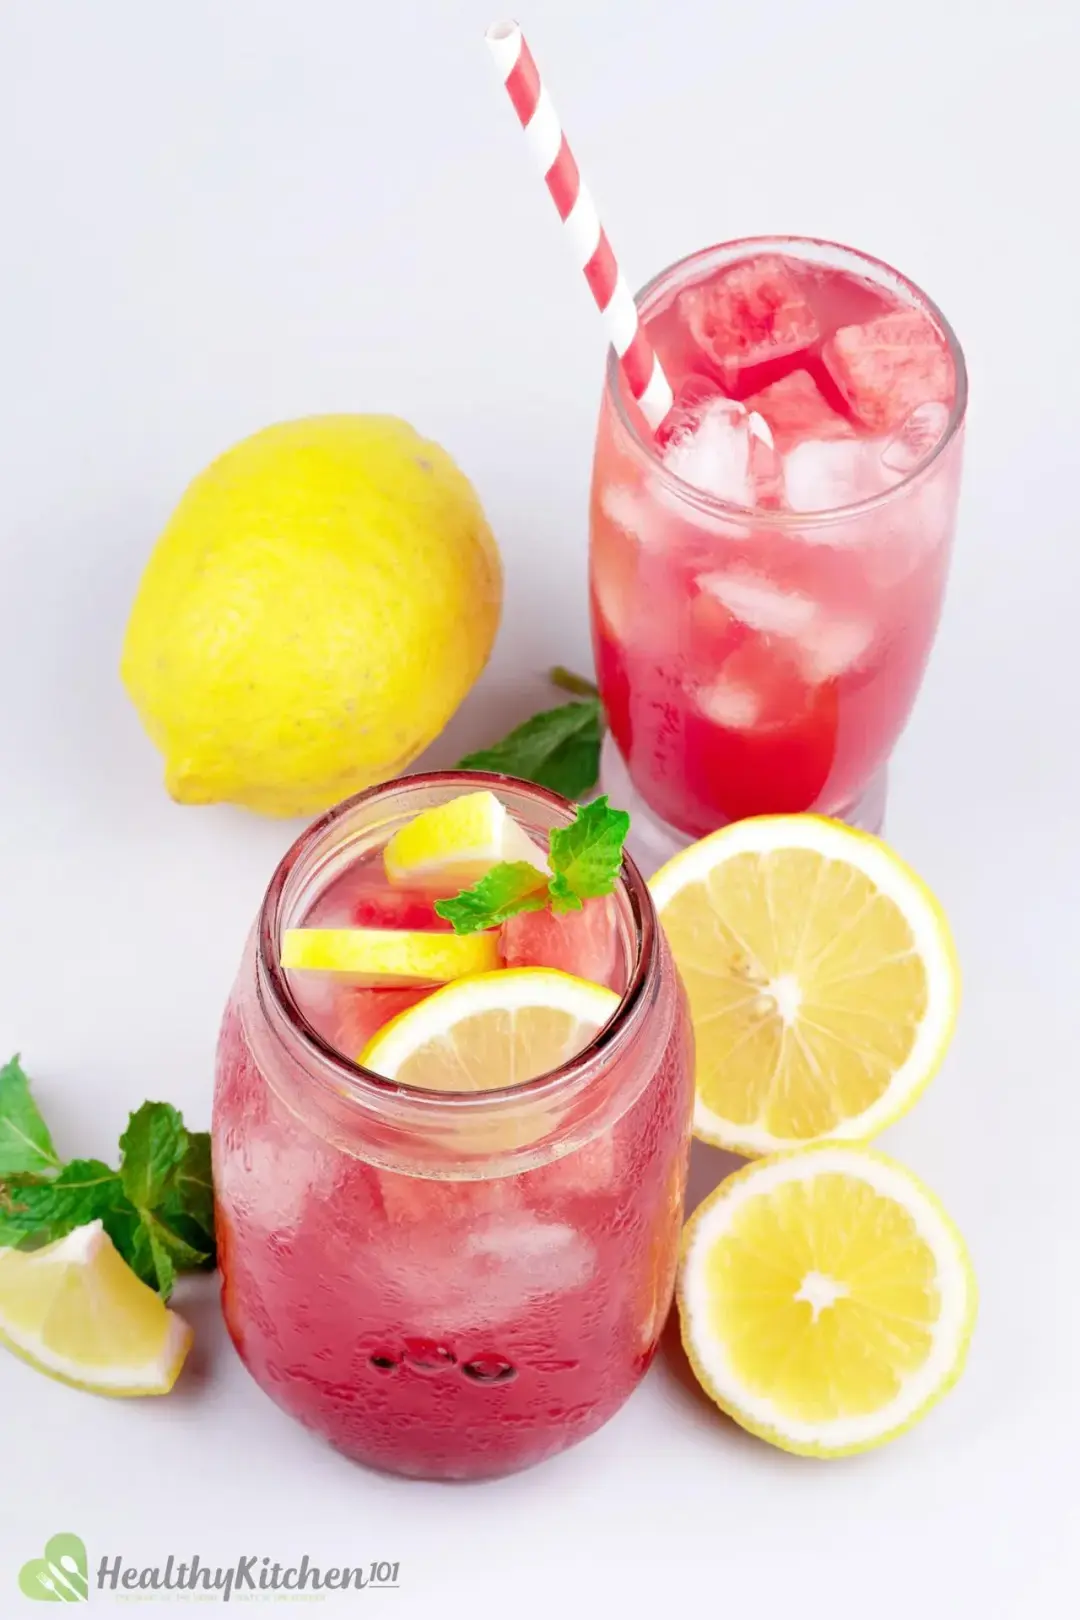  A glass of watermelon juice and lemon with a pink-striped straw and a jar of watermelon juice and lemon topped with three lemon slices and mint leaves